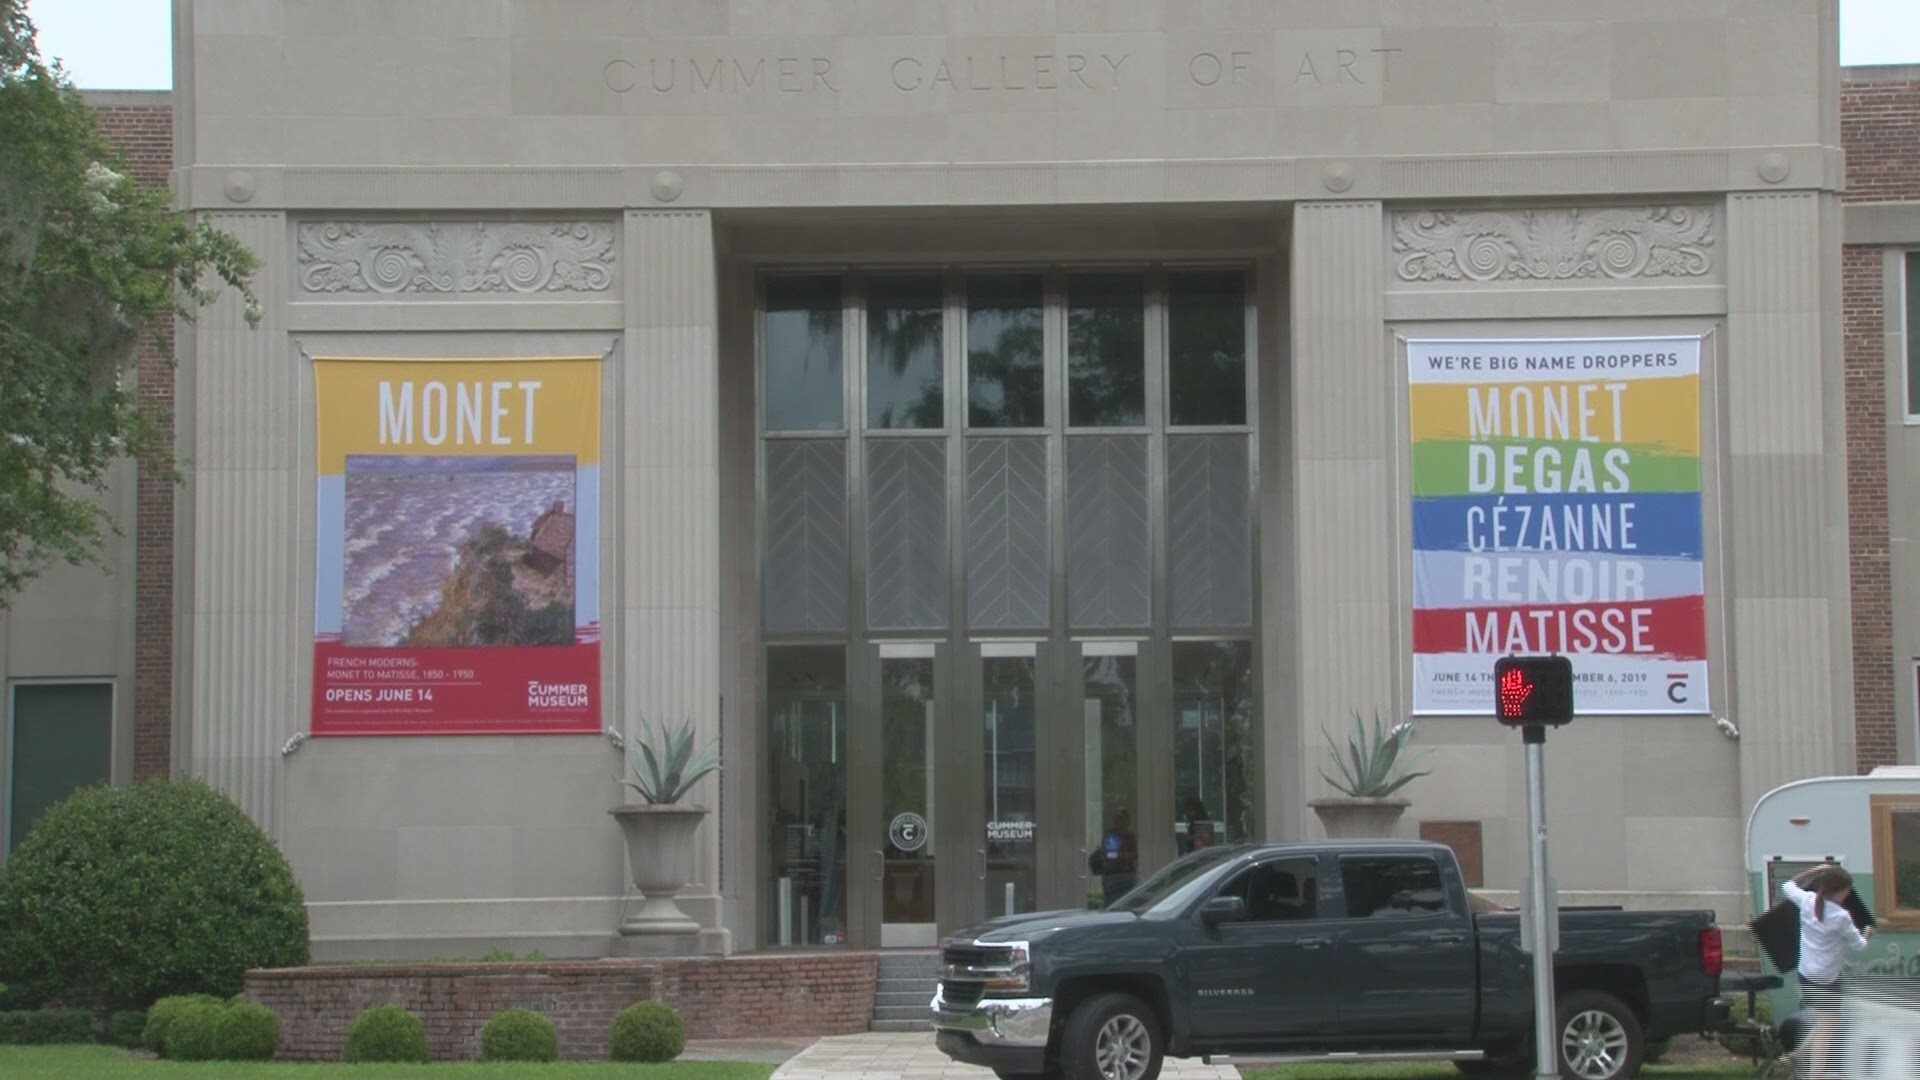 Jacksonville's art enthusiasts will get the chance to witness original artwork by some of France's most renowned artists at the Cummer Museum's newest exhibit "French Moderns: Monet to Matisse, 1850-1950."